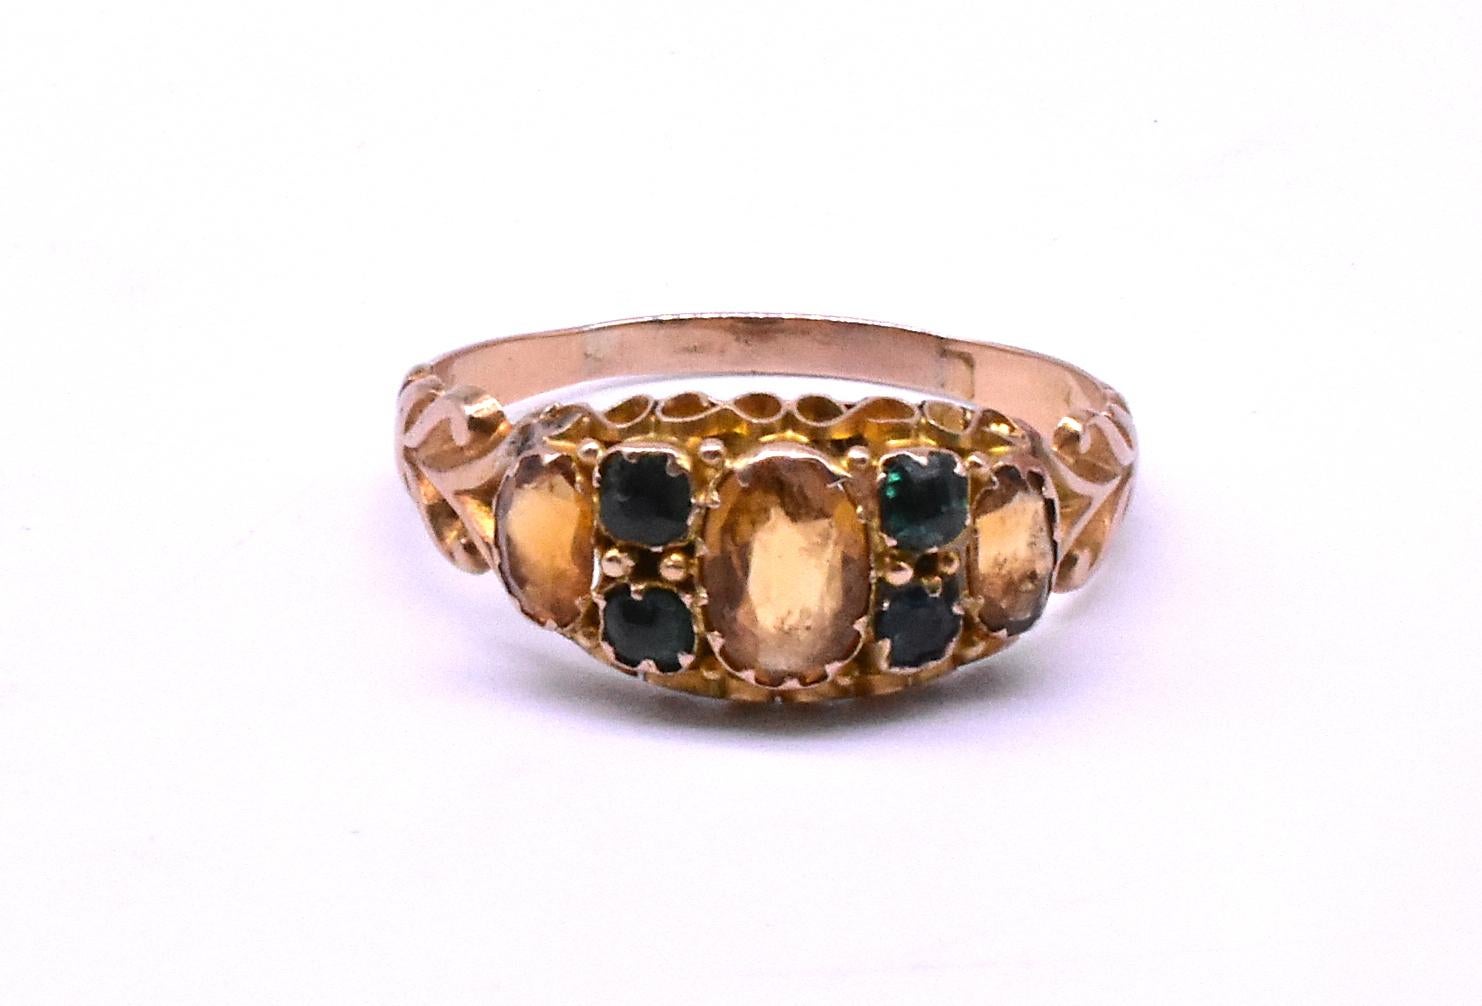 C1860 this lovely  15ct ring in the shape of what we call a classic Victorian five stone ring, has three citrines and four emeralds. The double emeralds flanking the central citrine are an unusual design, and the combination of the yellow and green